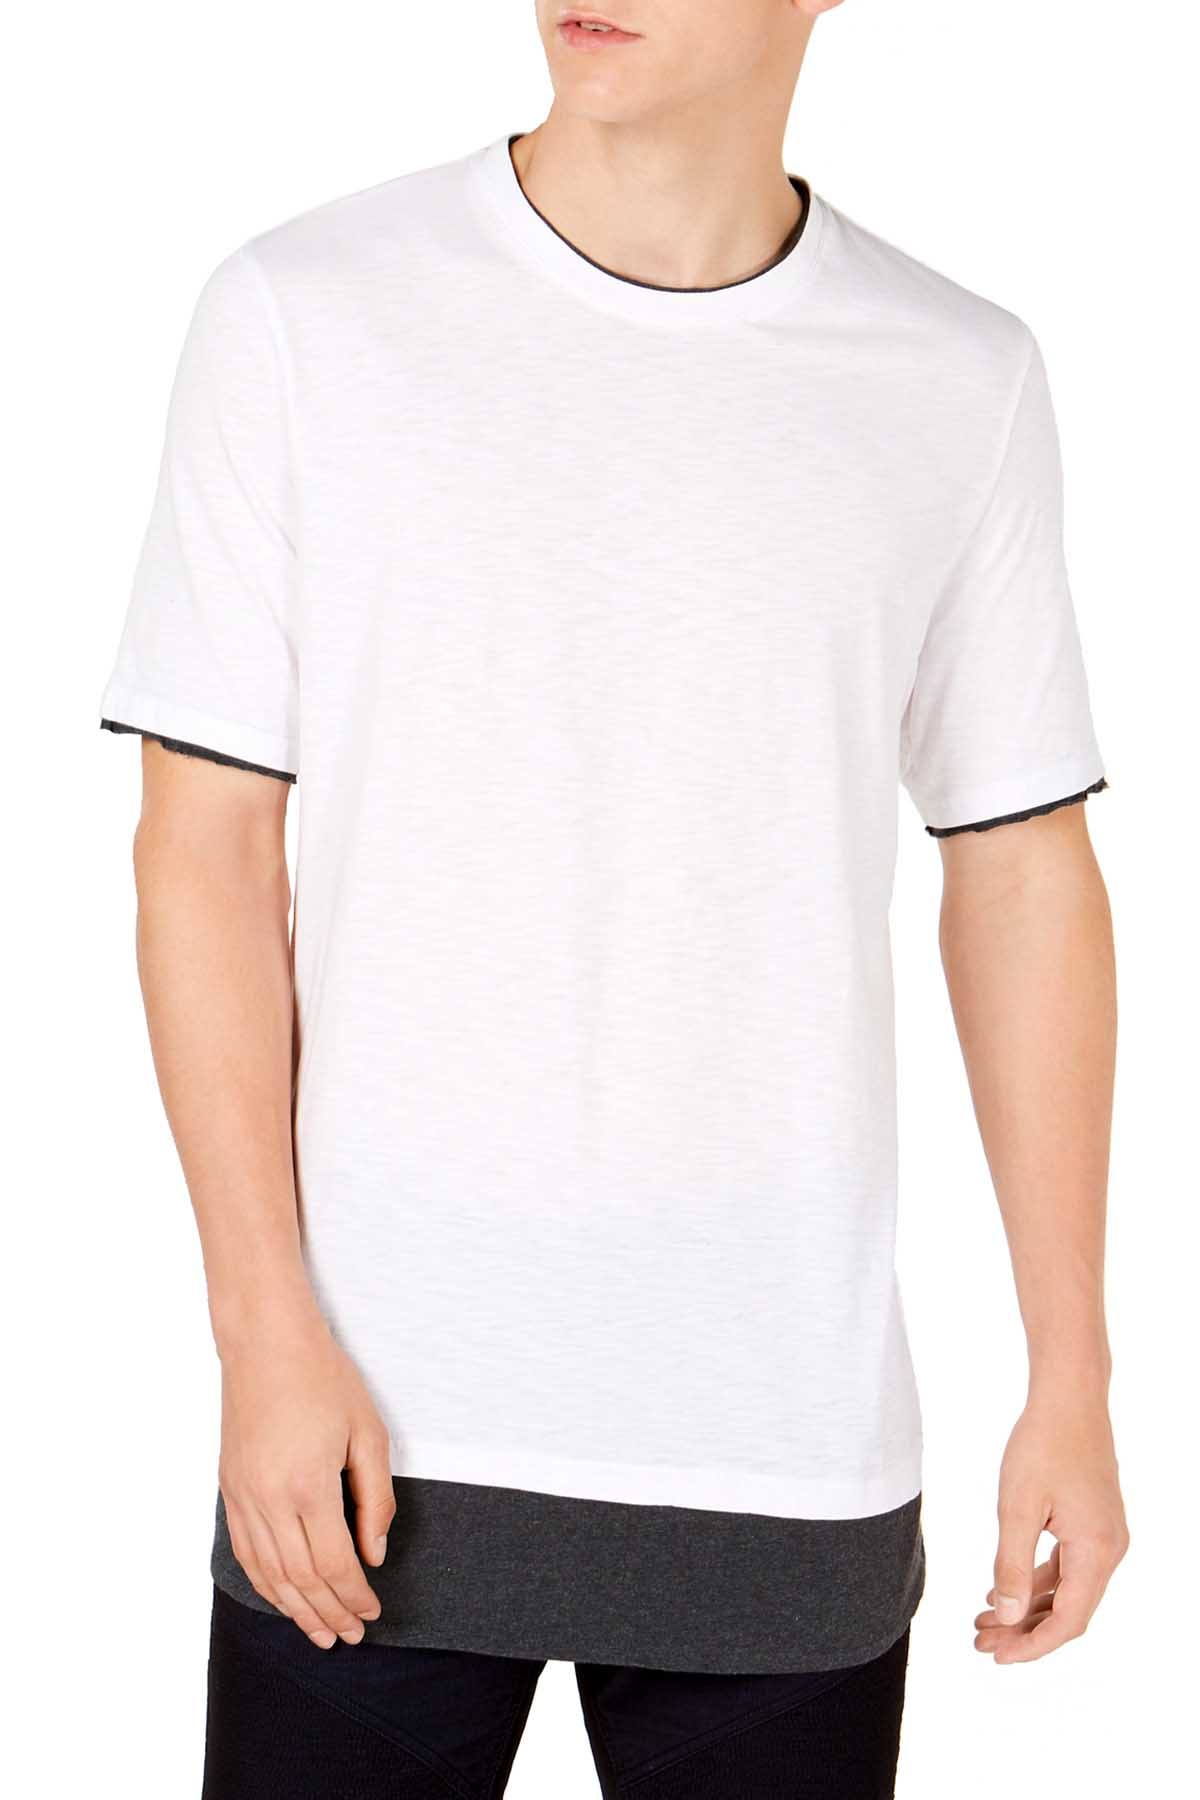 INC International Concepts Pure White Colorblocked Layered-Look T-Shirt